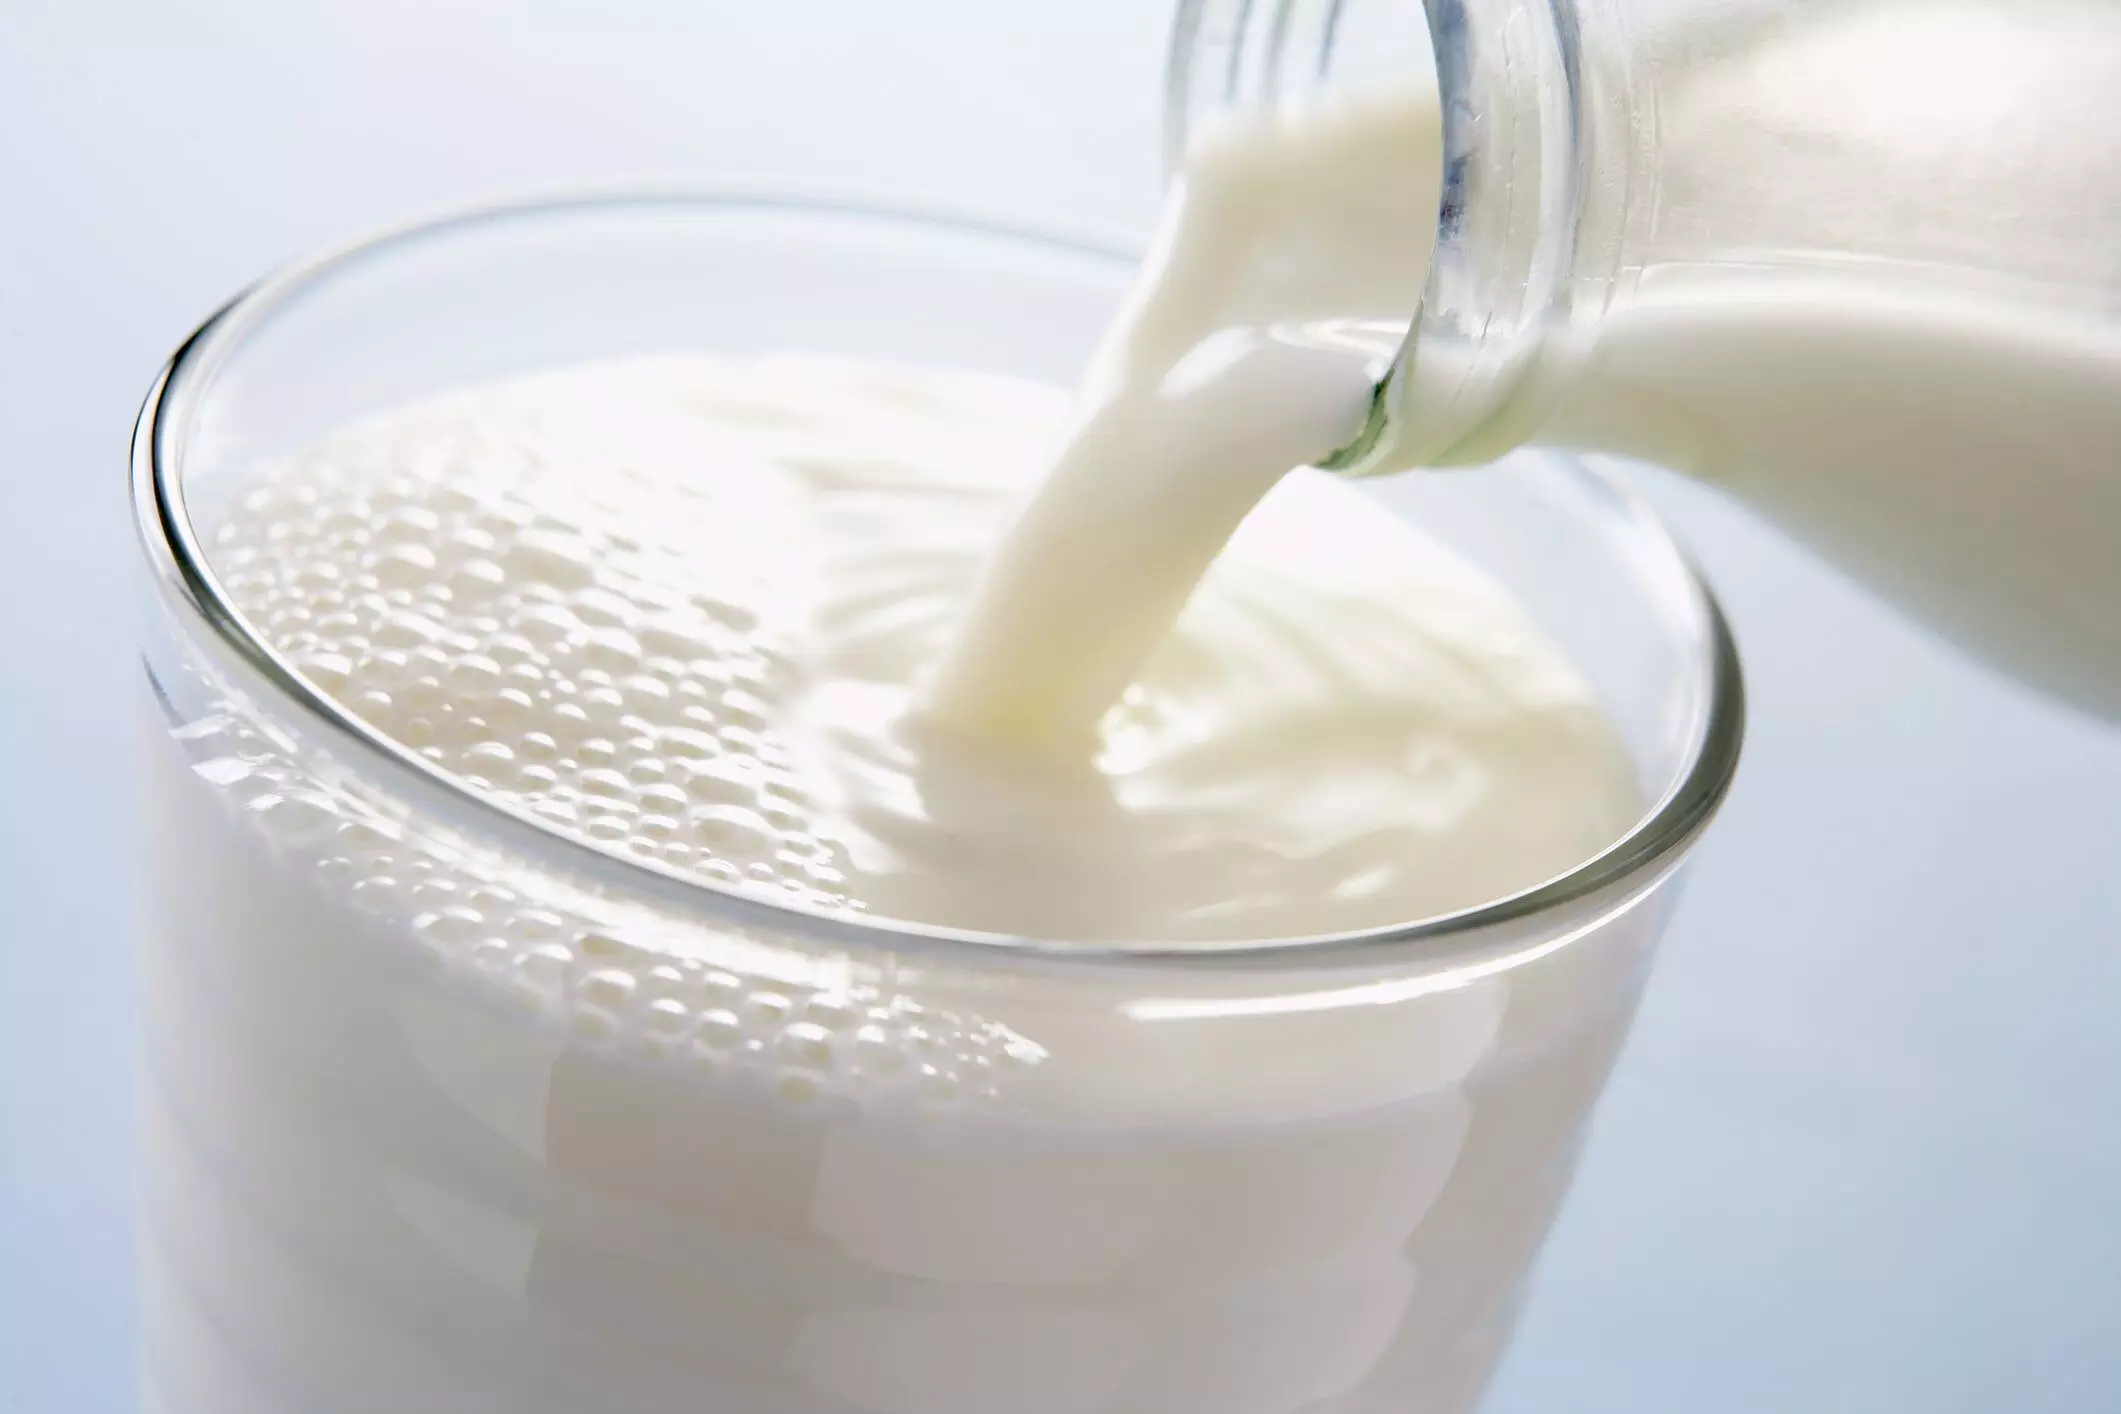 FG plans to ban importation of milk by 2023